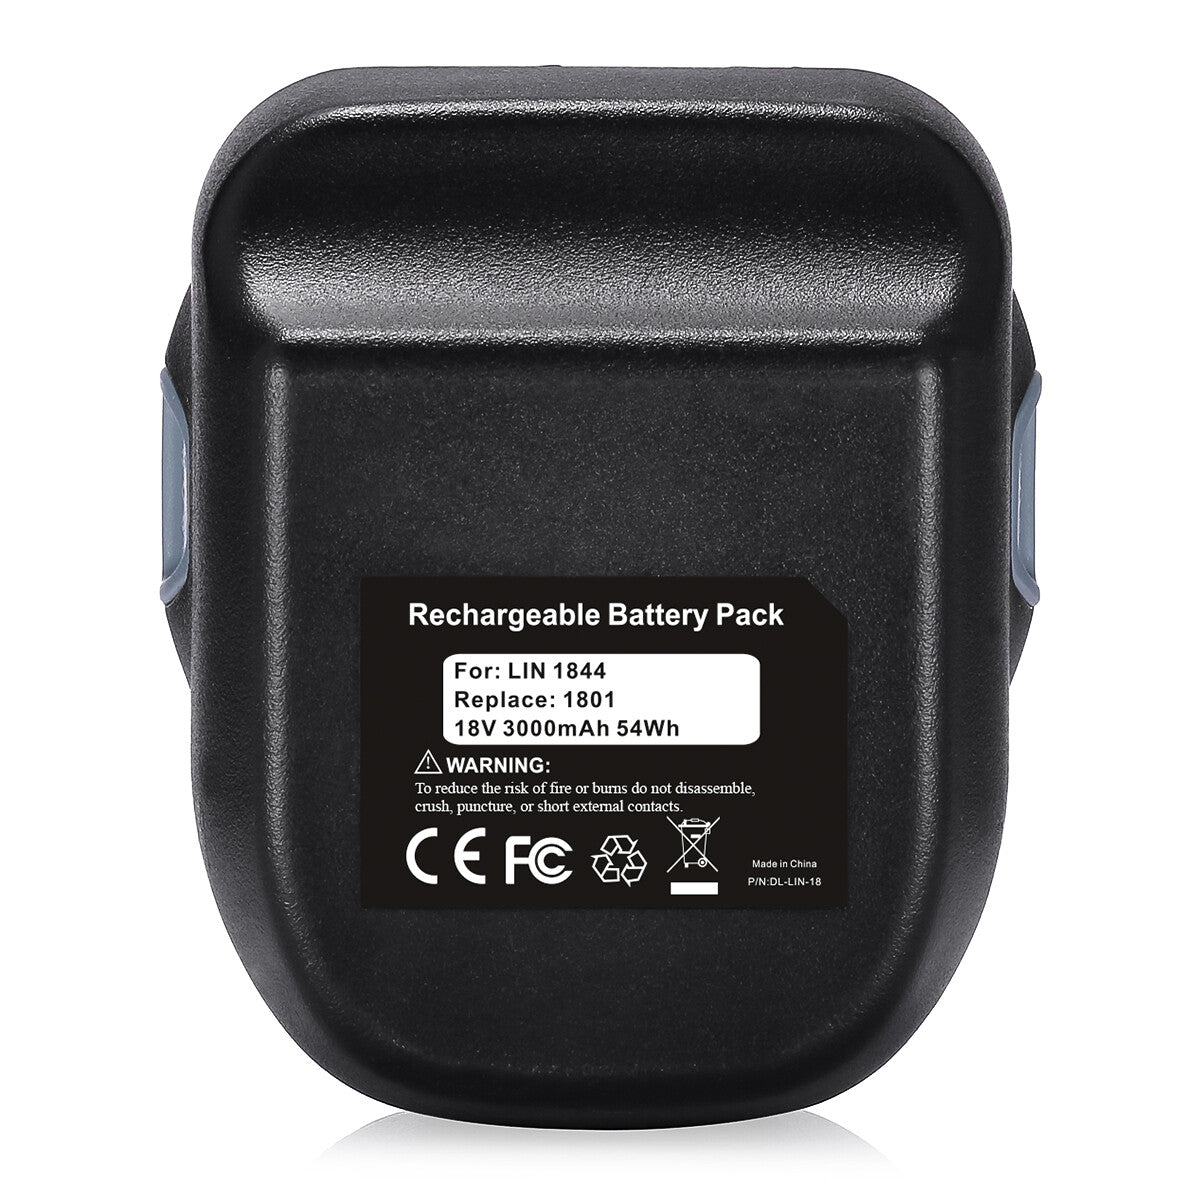 Lincoln 18V Replacement Battery 3.0Ah for Lincoln 1801, 1842, 1844, 1444, 1442